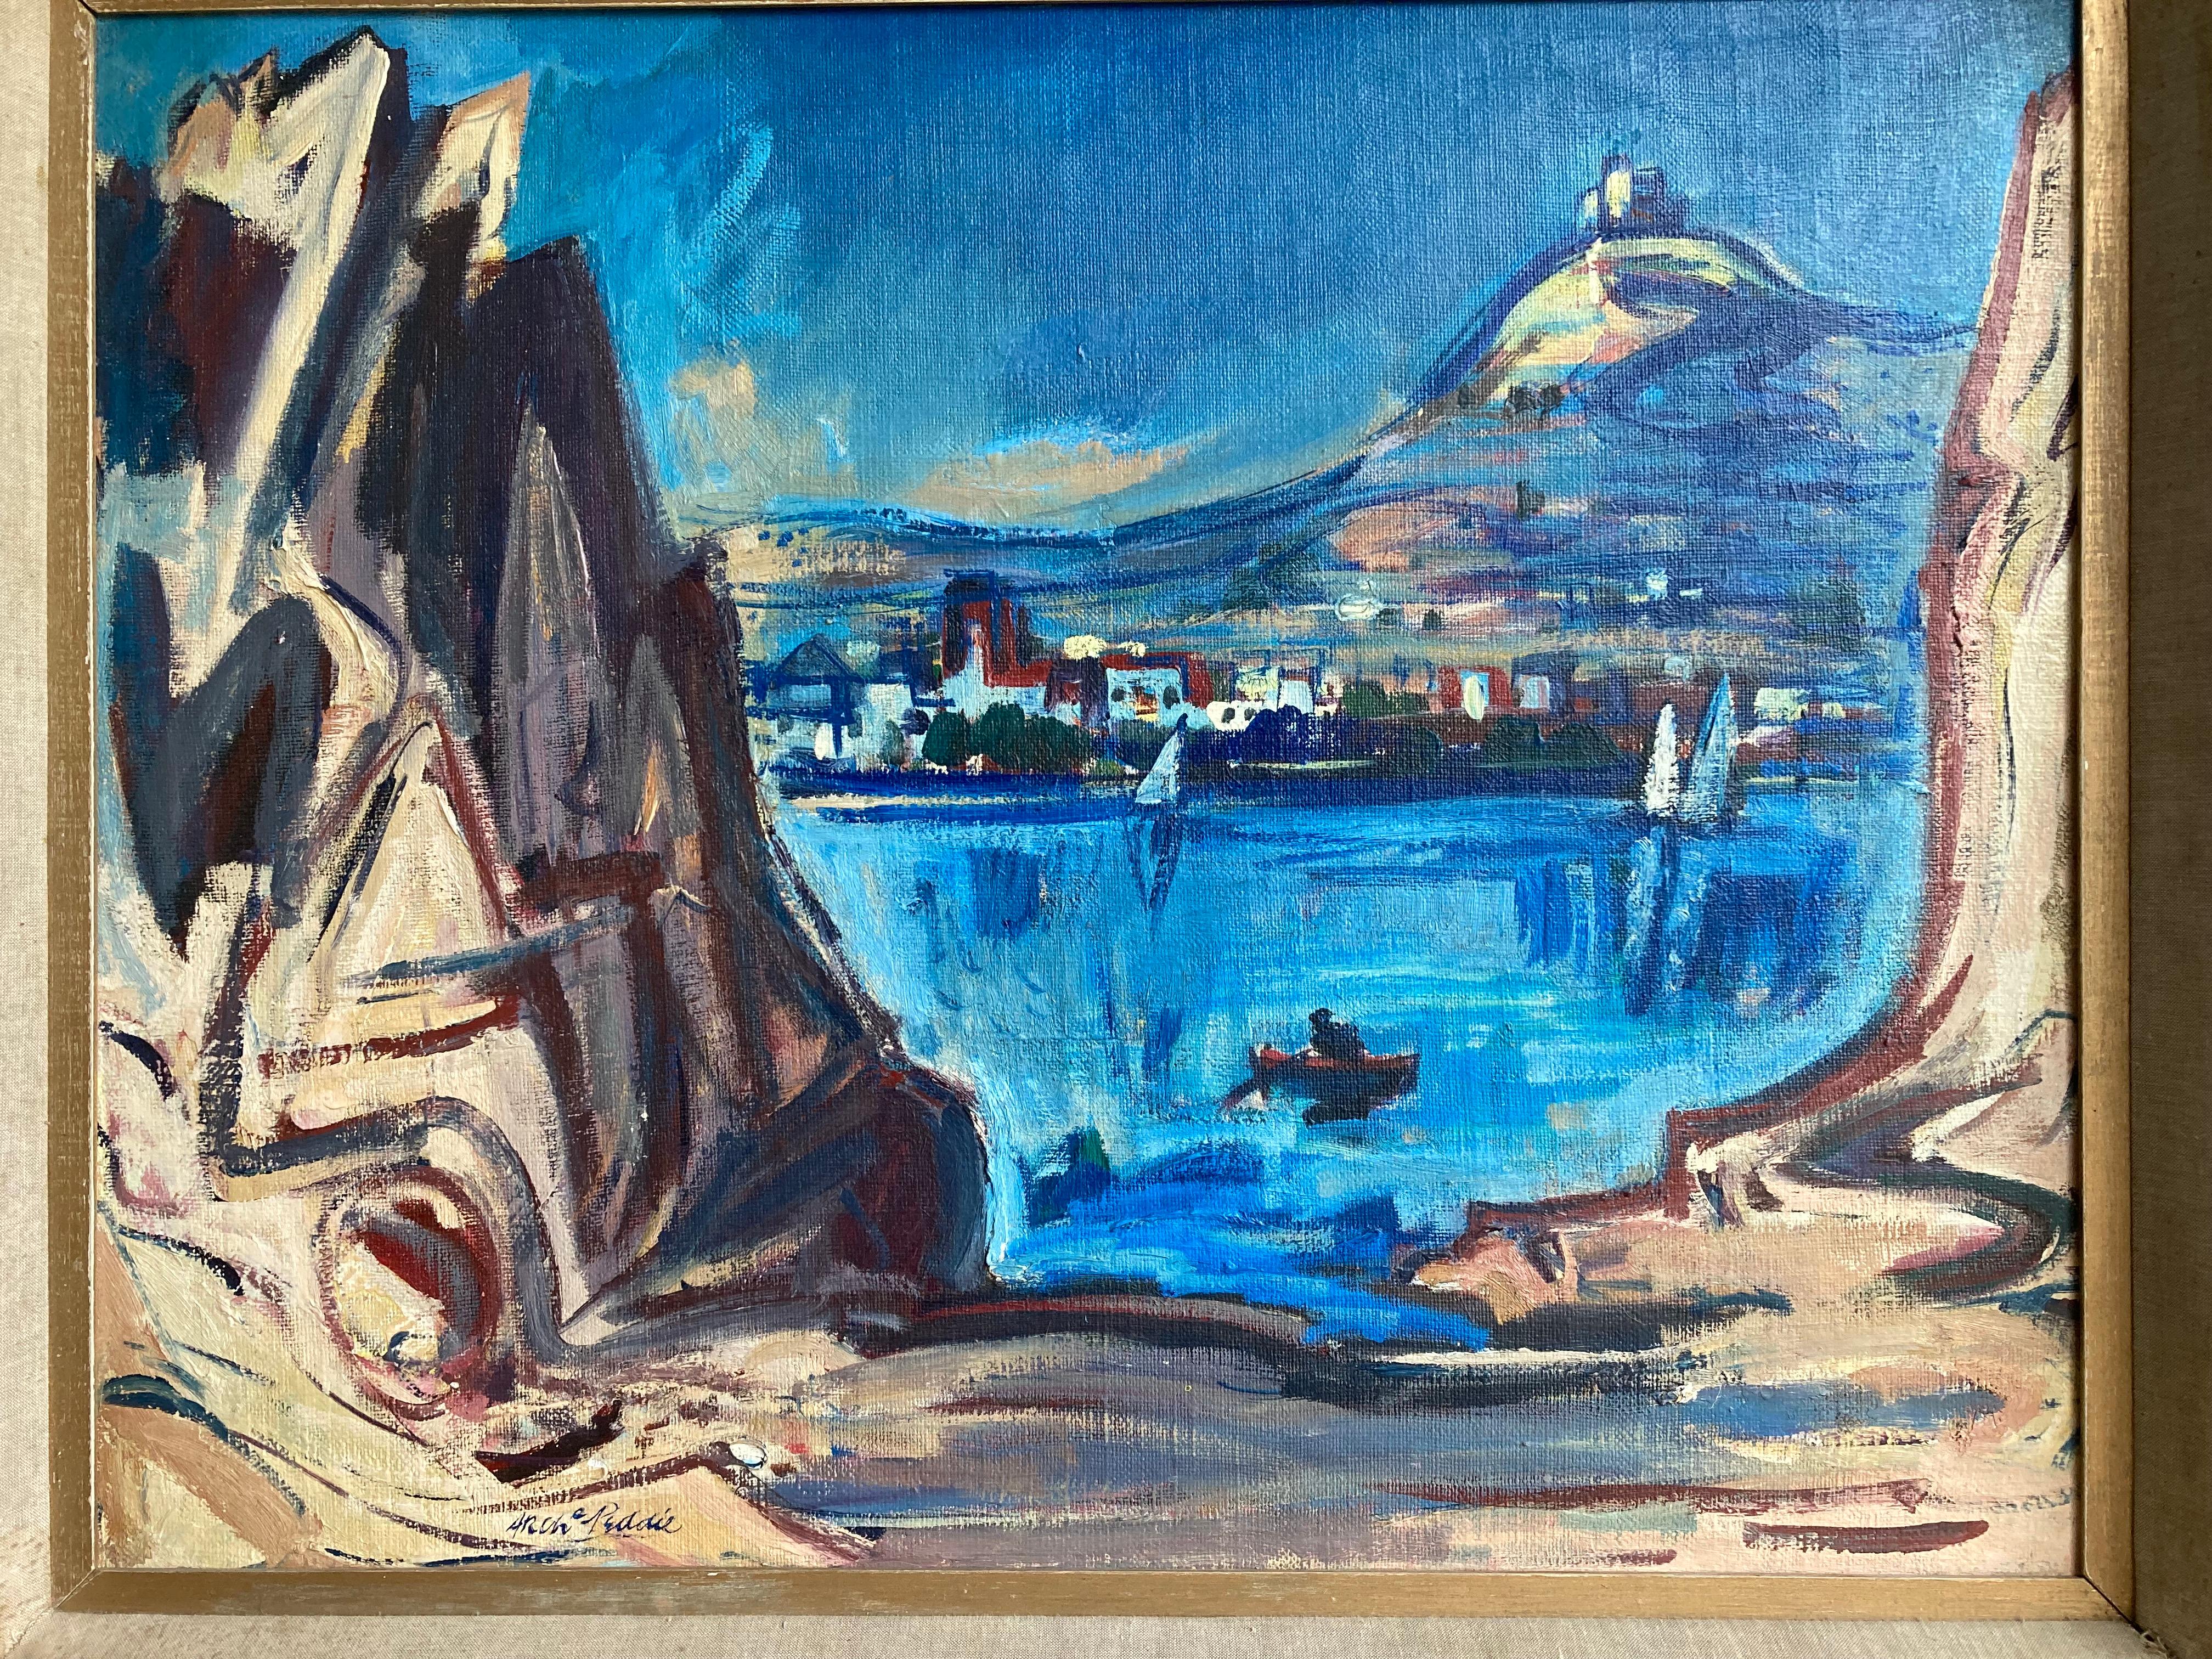 A very striking large scale view of a mountainous Mediterranean harbour.

Archibald Peddie (1917-1991)
Am extensive harbour scene
Signed and inscribed verso
Oil on board
29 x 35½ inches unframed
31 x 37½ with the frame

Archibald Peddie 1917-1991